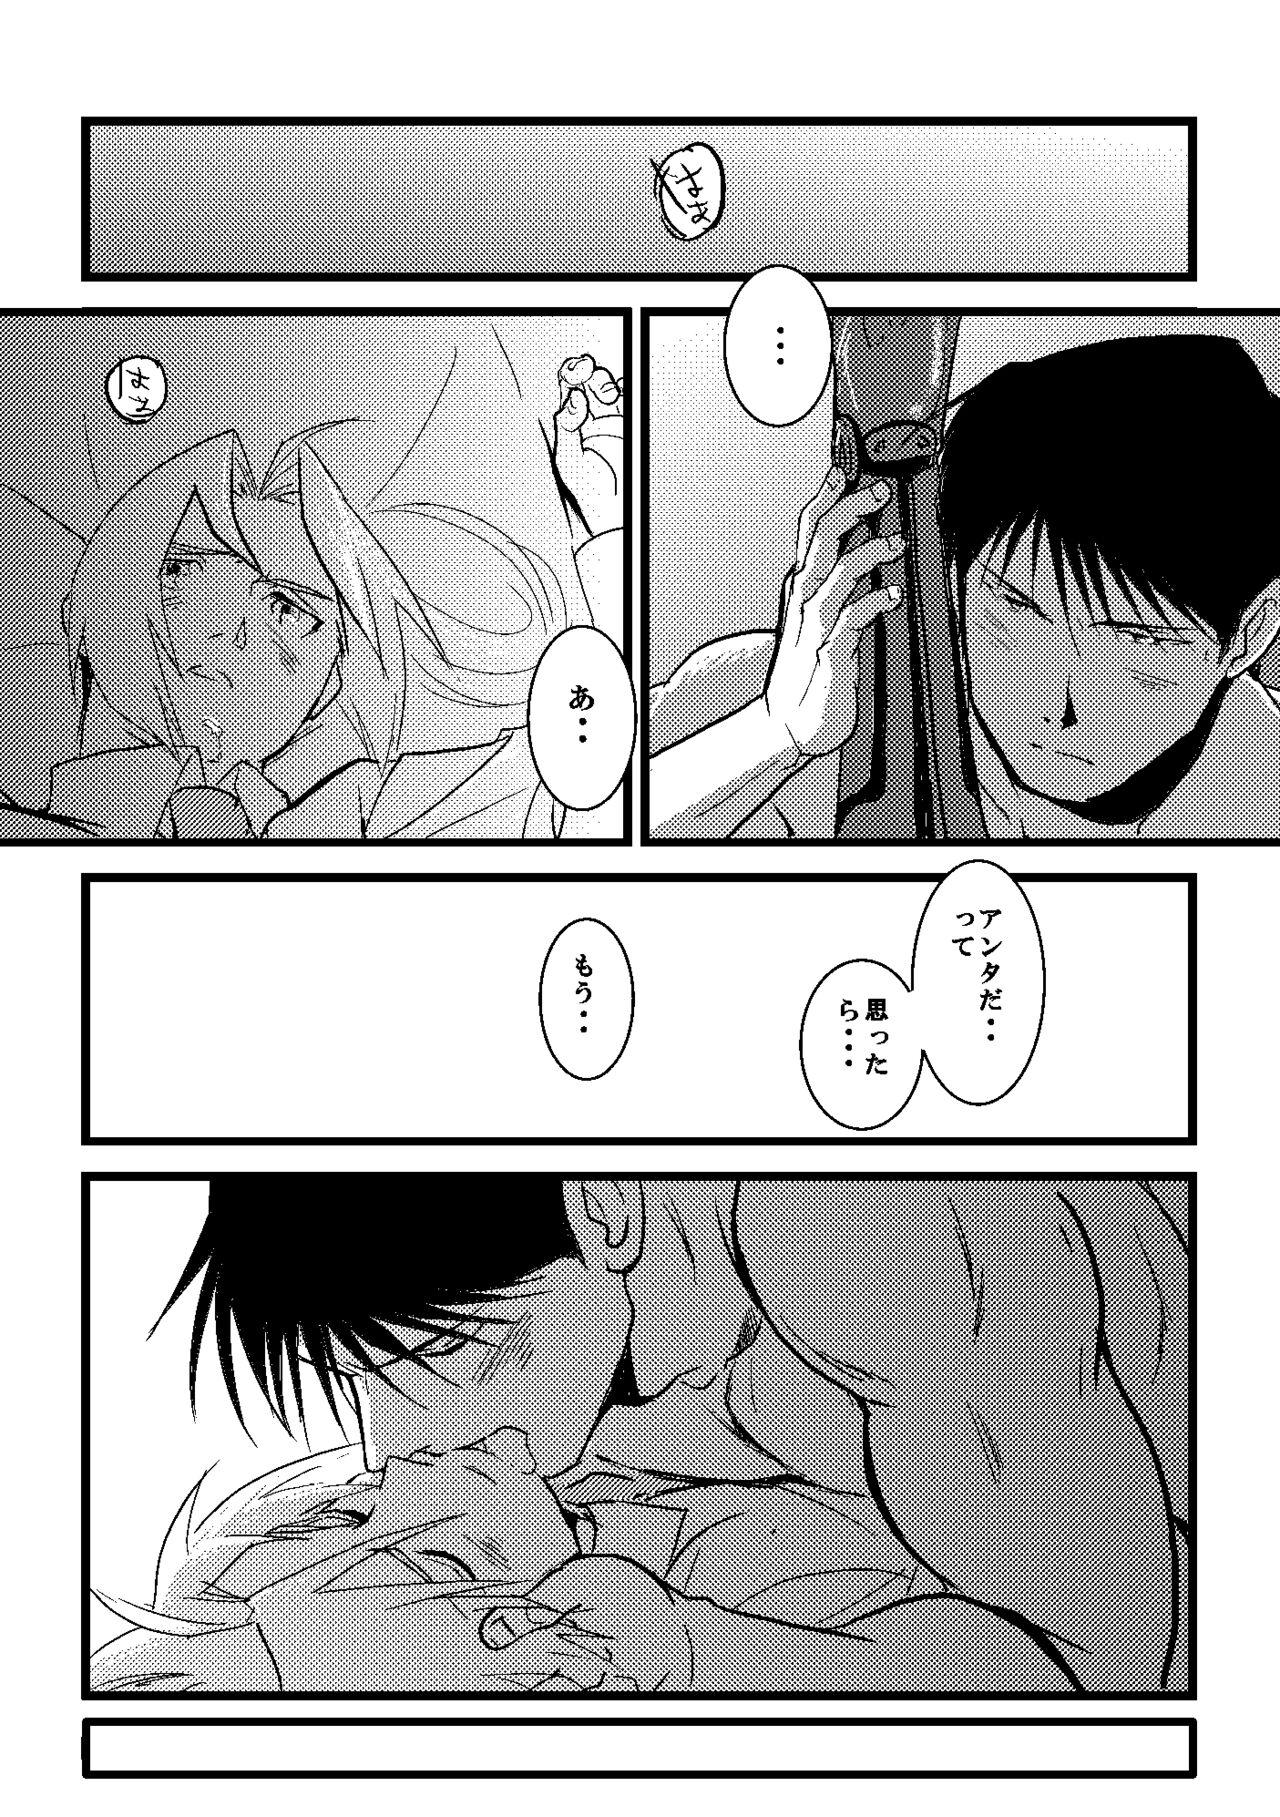 Butts After that and then - Fullmetal alchemist | hagane no renkinjutsushi Interacial - Page 10